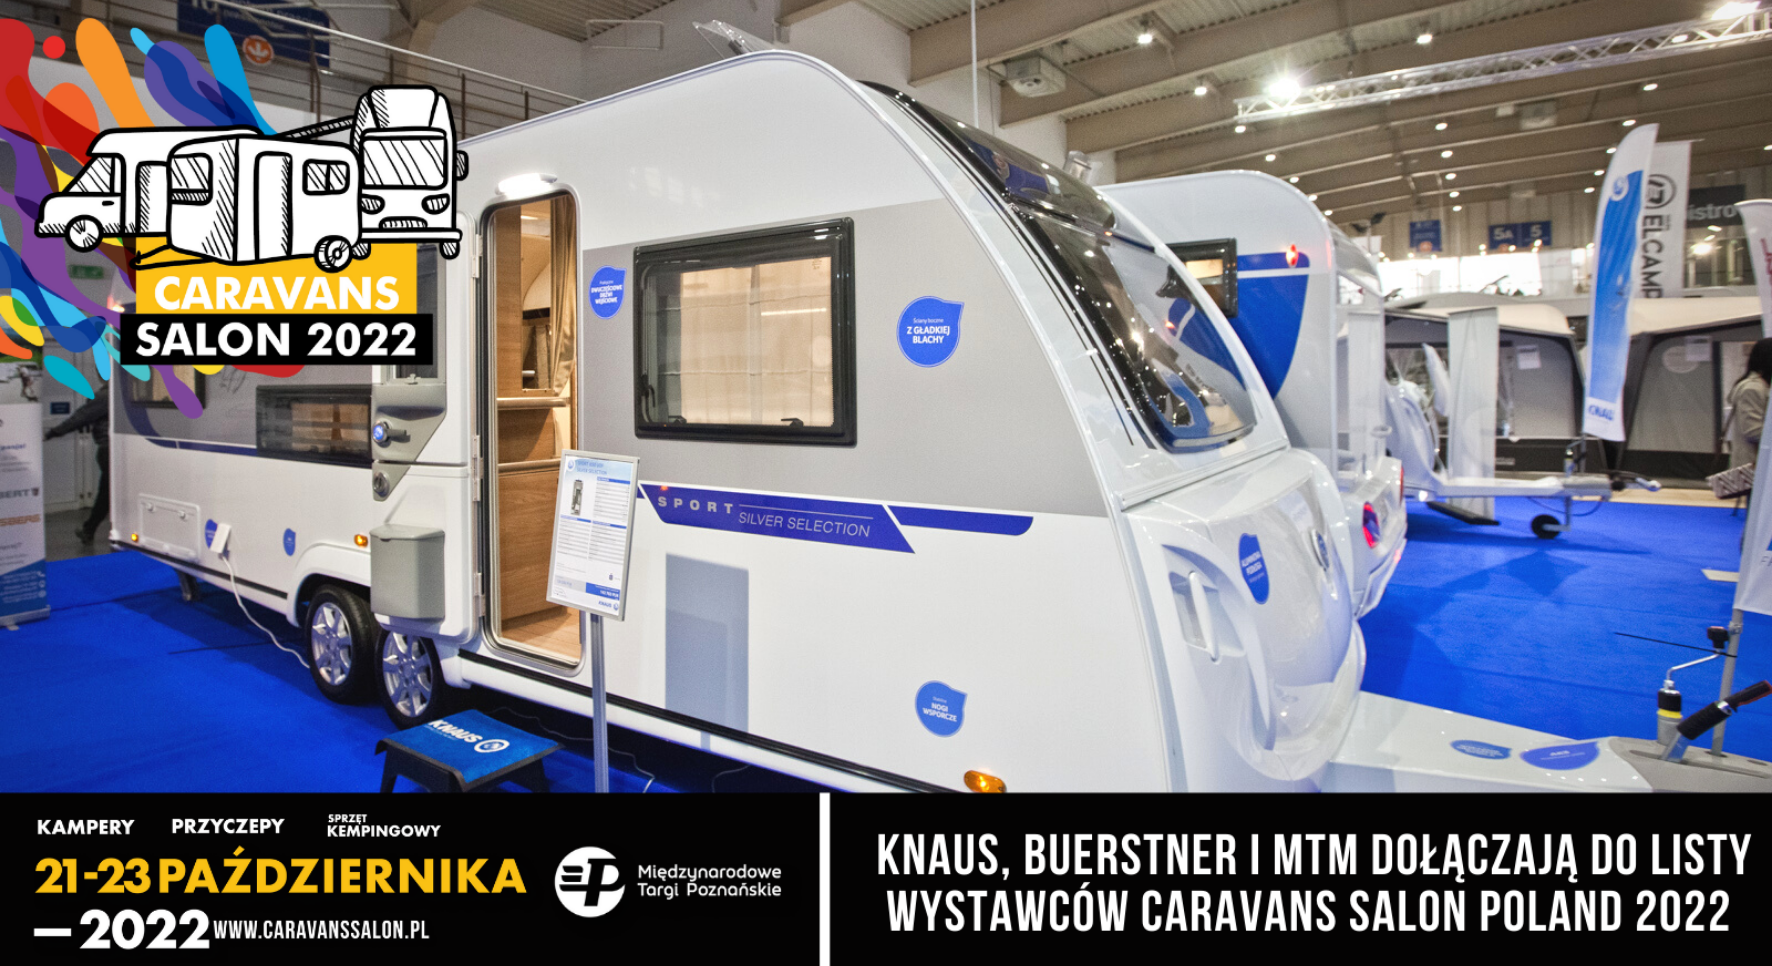 Knaus, Buerstner and MTM join the list of exhibitors at Caravans Salon Poland 2022 in Poznań – main image